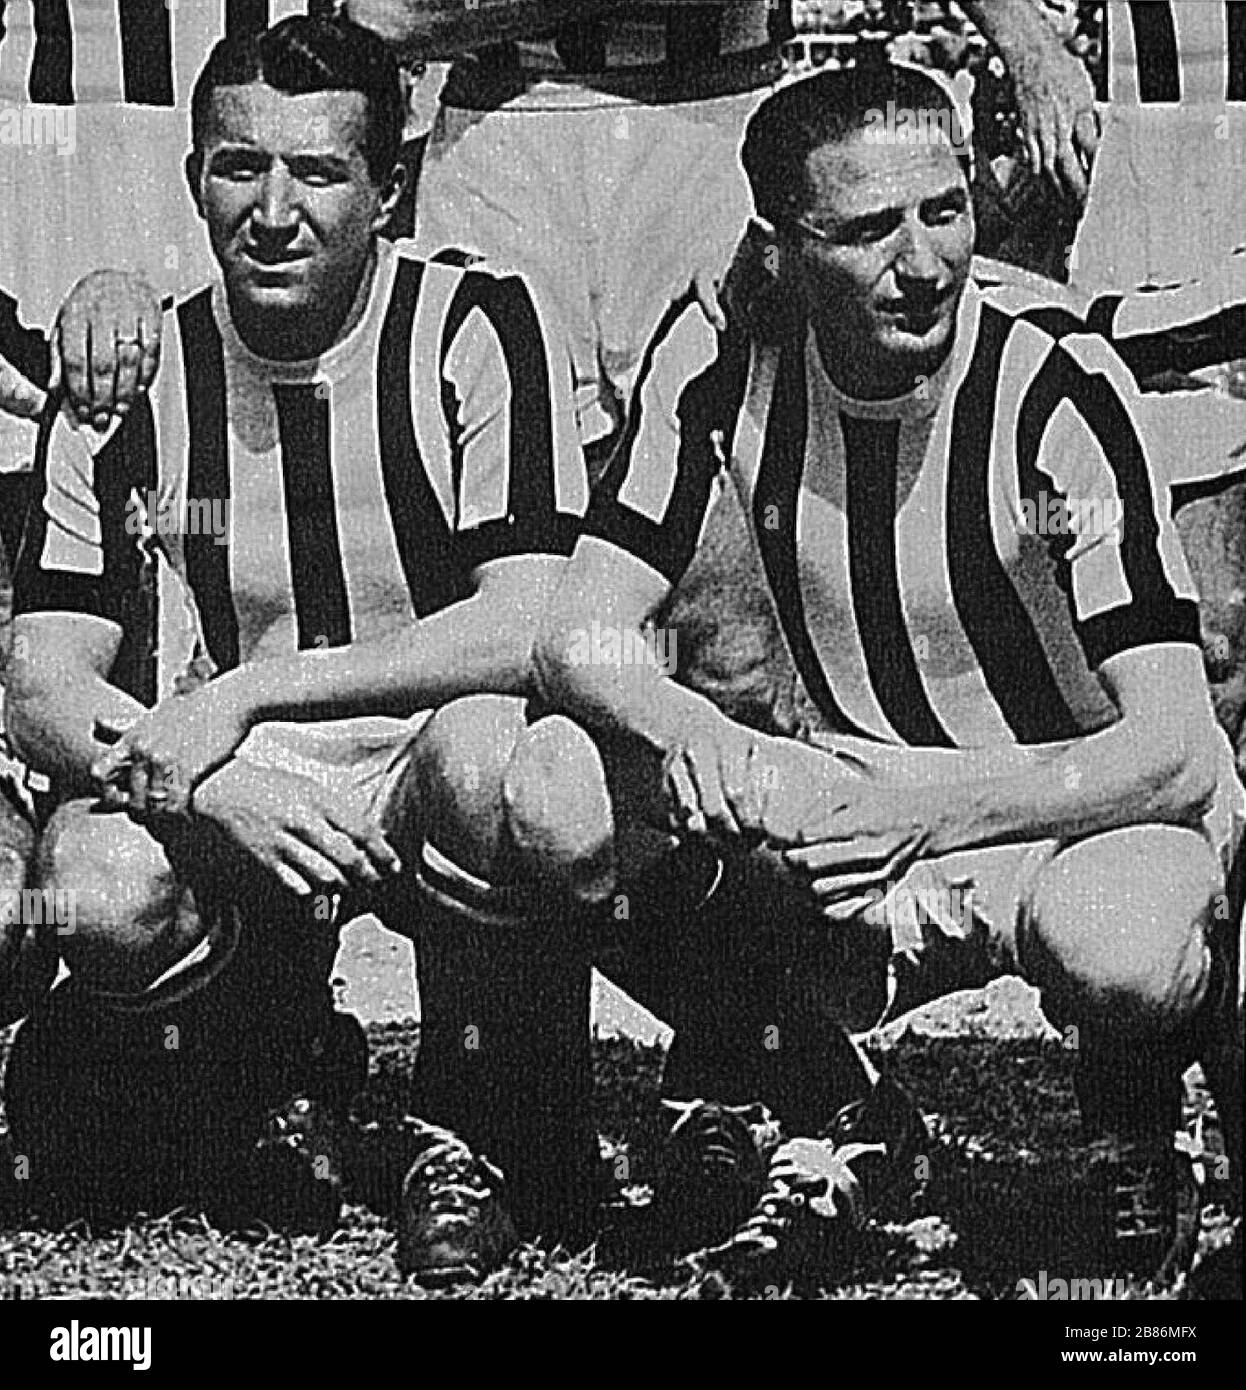 'From left to right: Juventus F.C.'s footballers, Czechoslovakian Čestmír Vycpálek and Italian Silvio Piola, in the 1946–47 season.; between 1946 and 1947 date QS:P,+1946-00-00T00:00:00Z/8,P1319,+1946-00-00T00:00:00Z/9,P1326,+1947-00-00T00:00:00Z/9; Armando Caruso (December 1971). Vychpalek. Hurrà Juventus (12): 18.; Unknown; ' Stock Photo